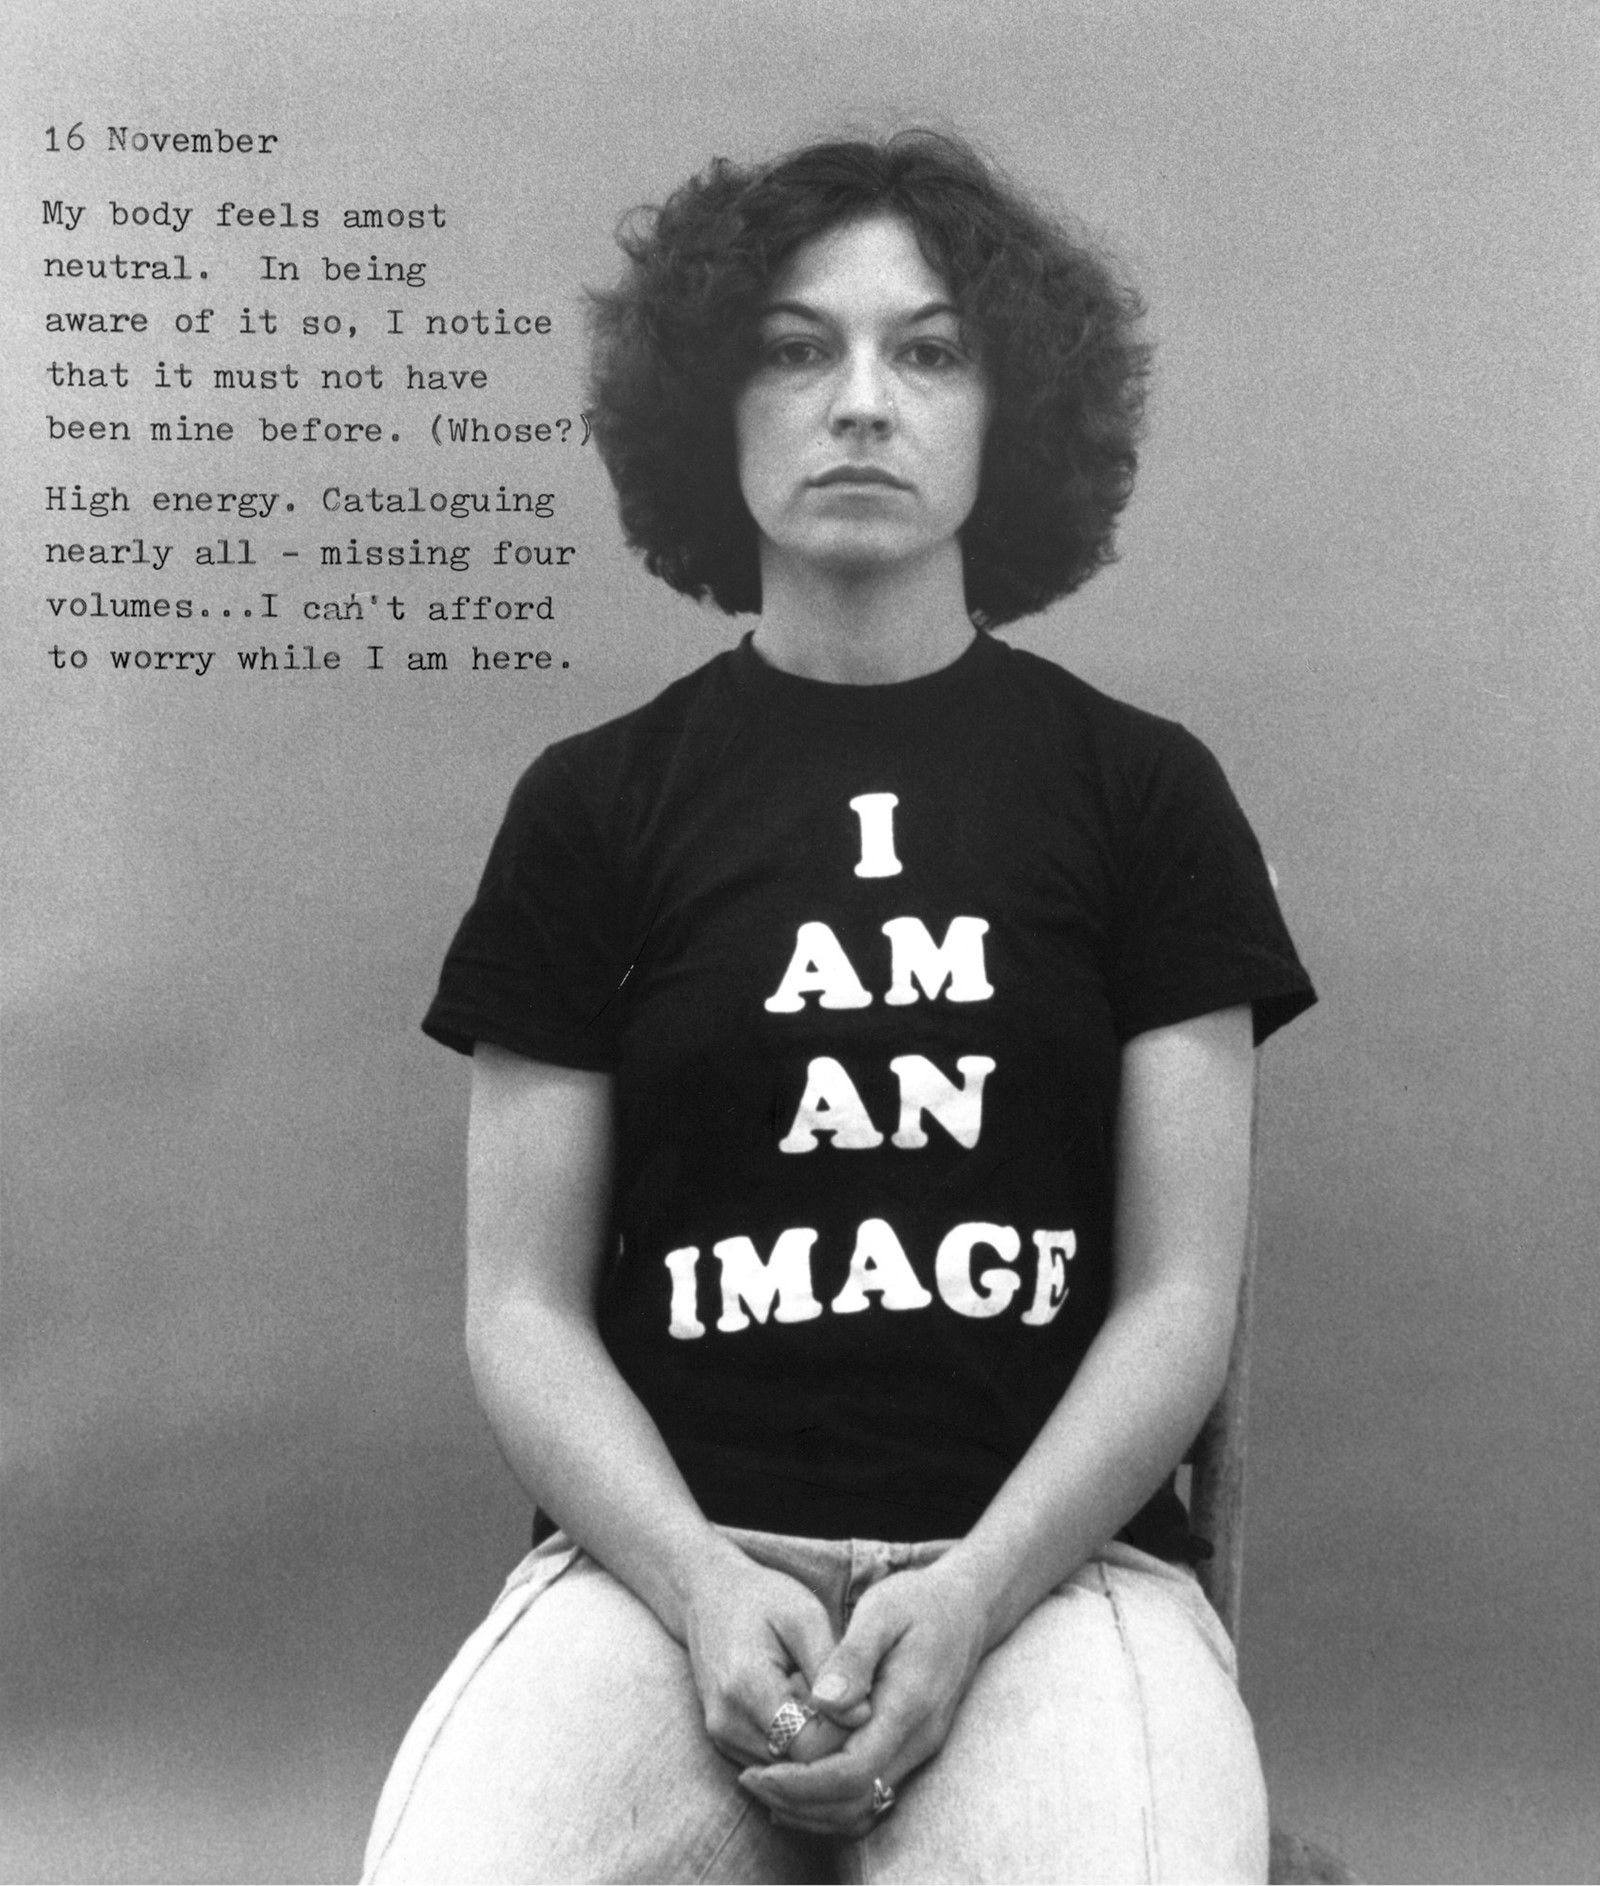 Donna-Lee Phillips, Thought Pieces, 1970, photography by Lew